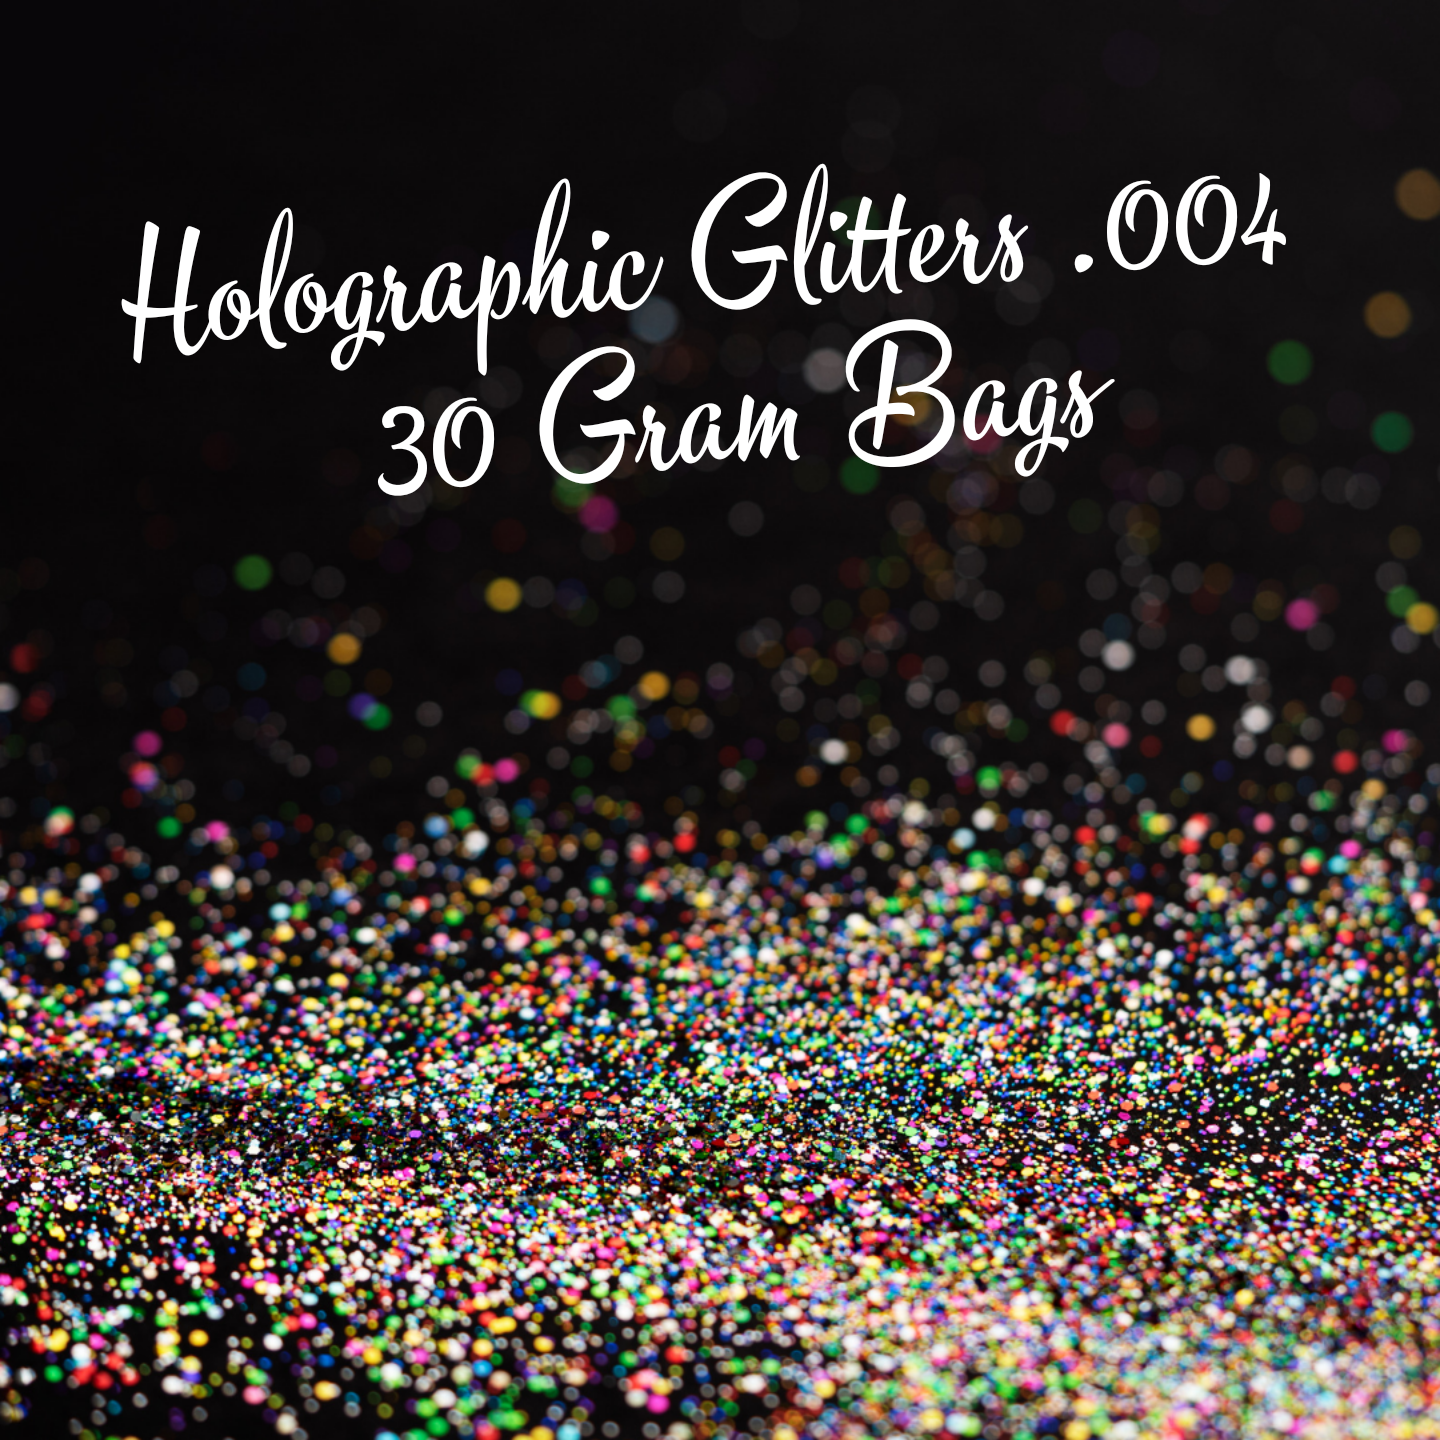 Holographic .004 Glitters 30 Gram Bags